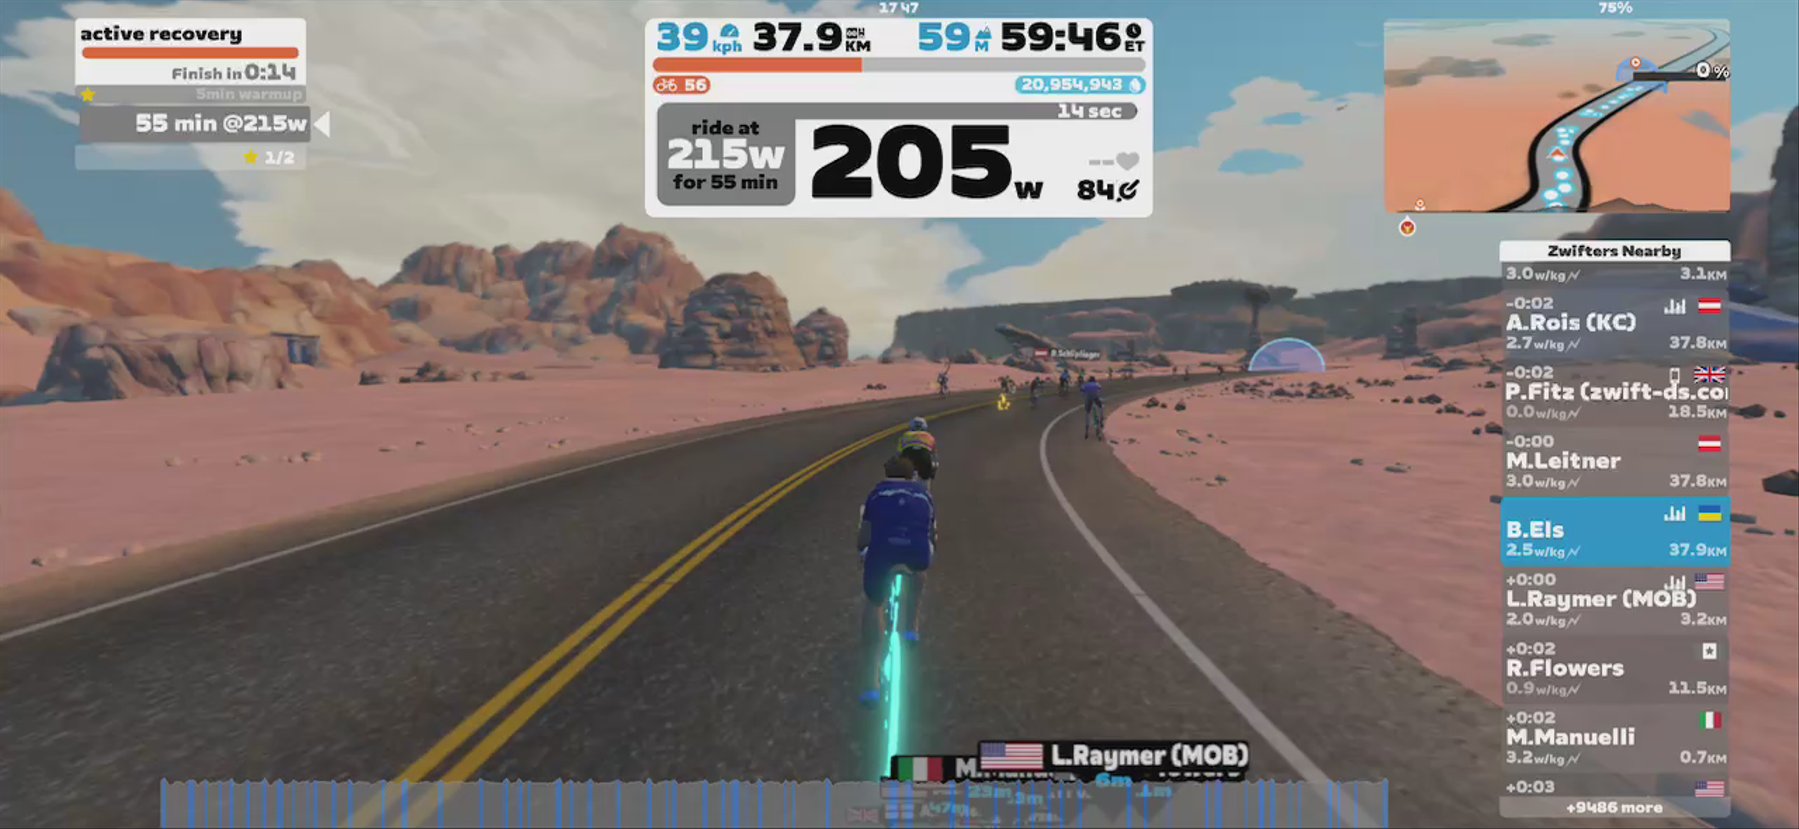 Zwift - active recovery in Watopia